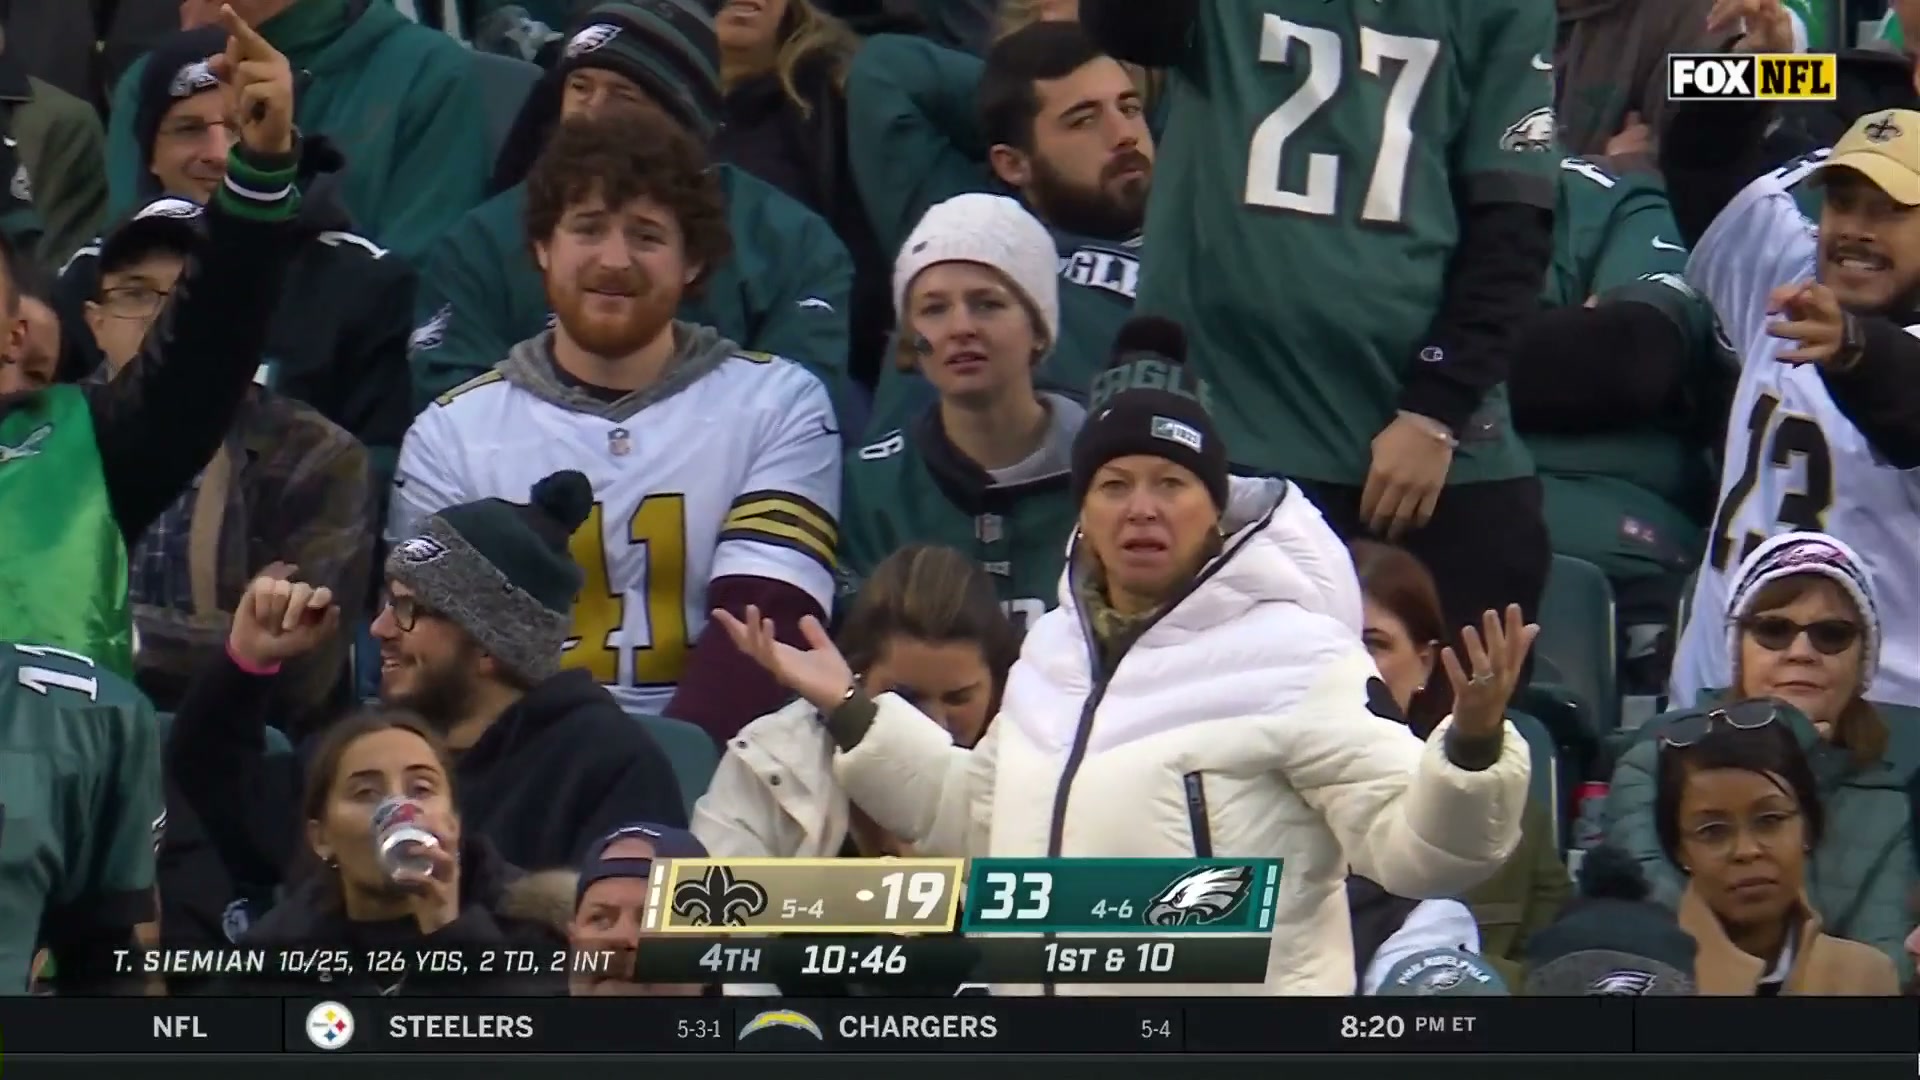 An Eagles fan puts her hands up in a "WHAT" motion